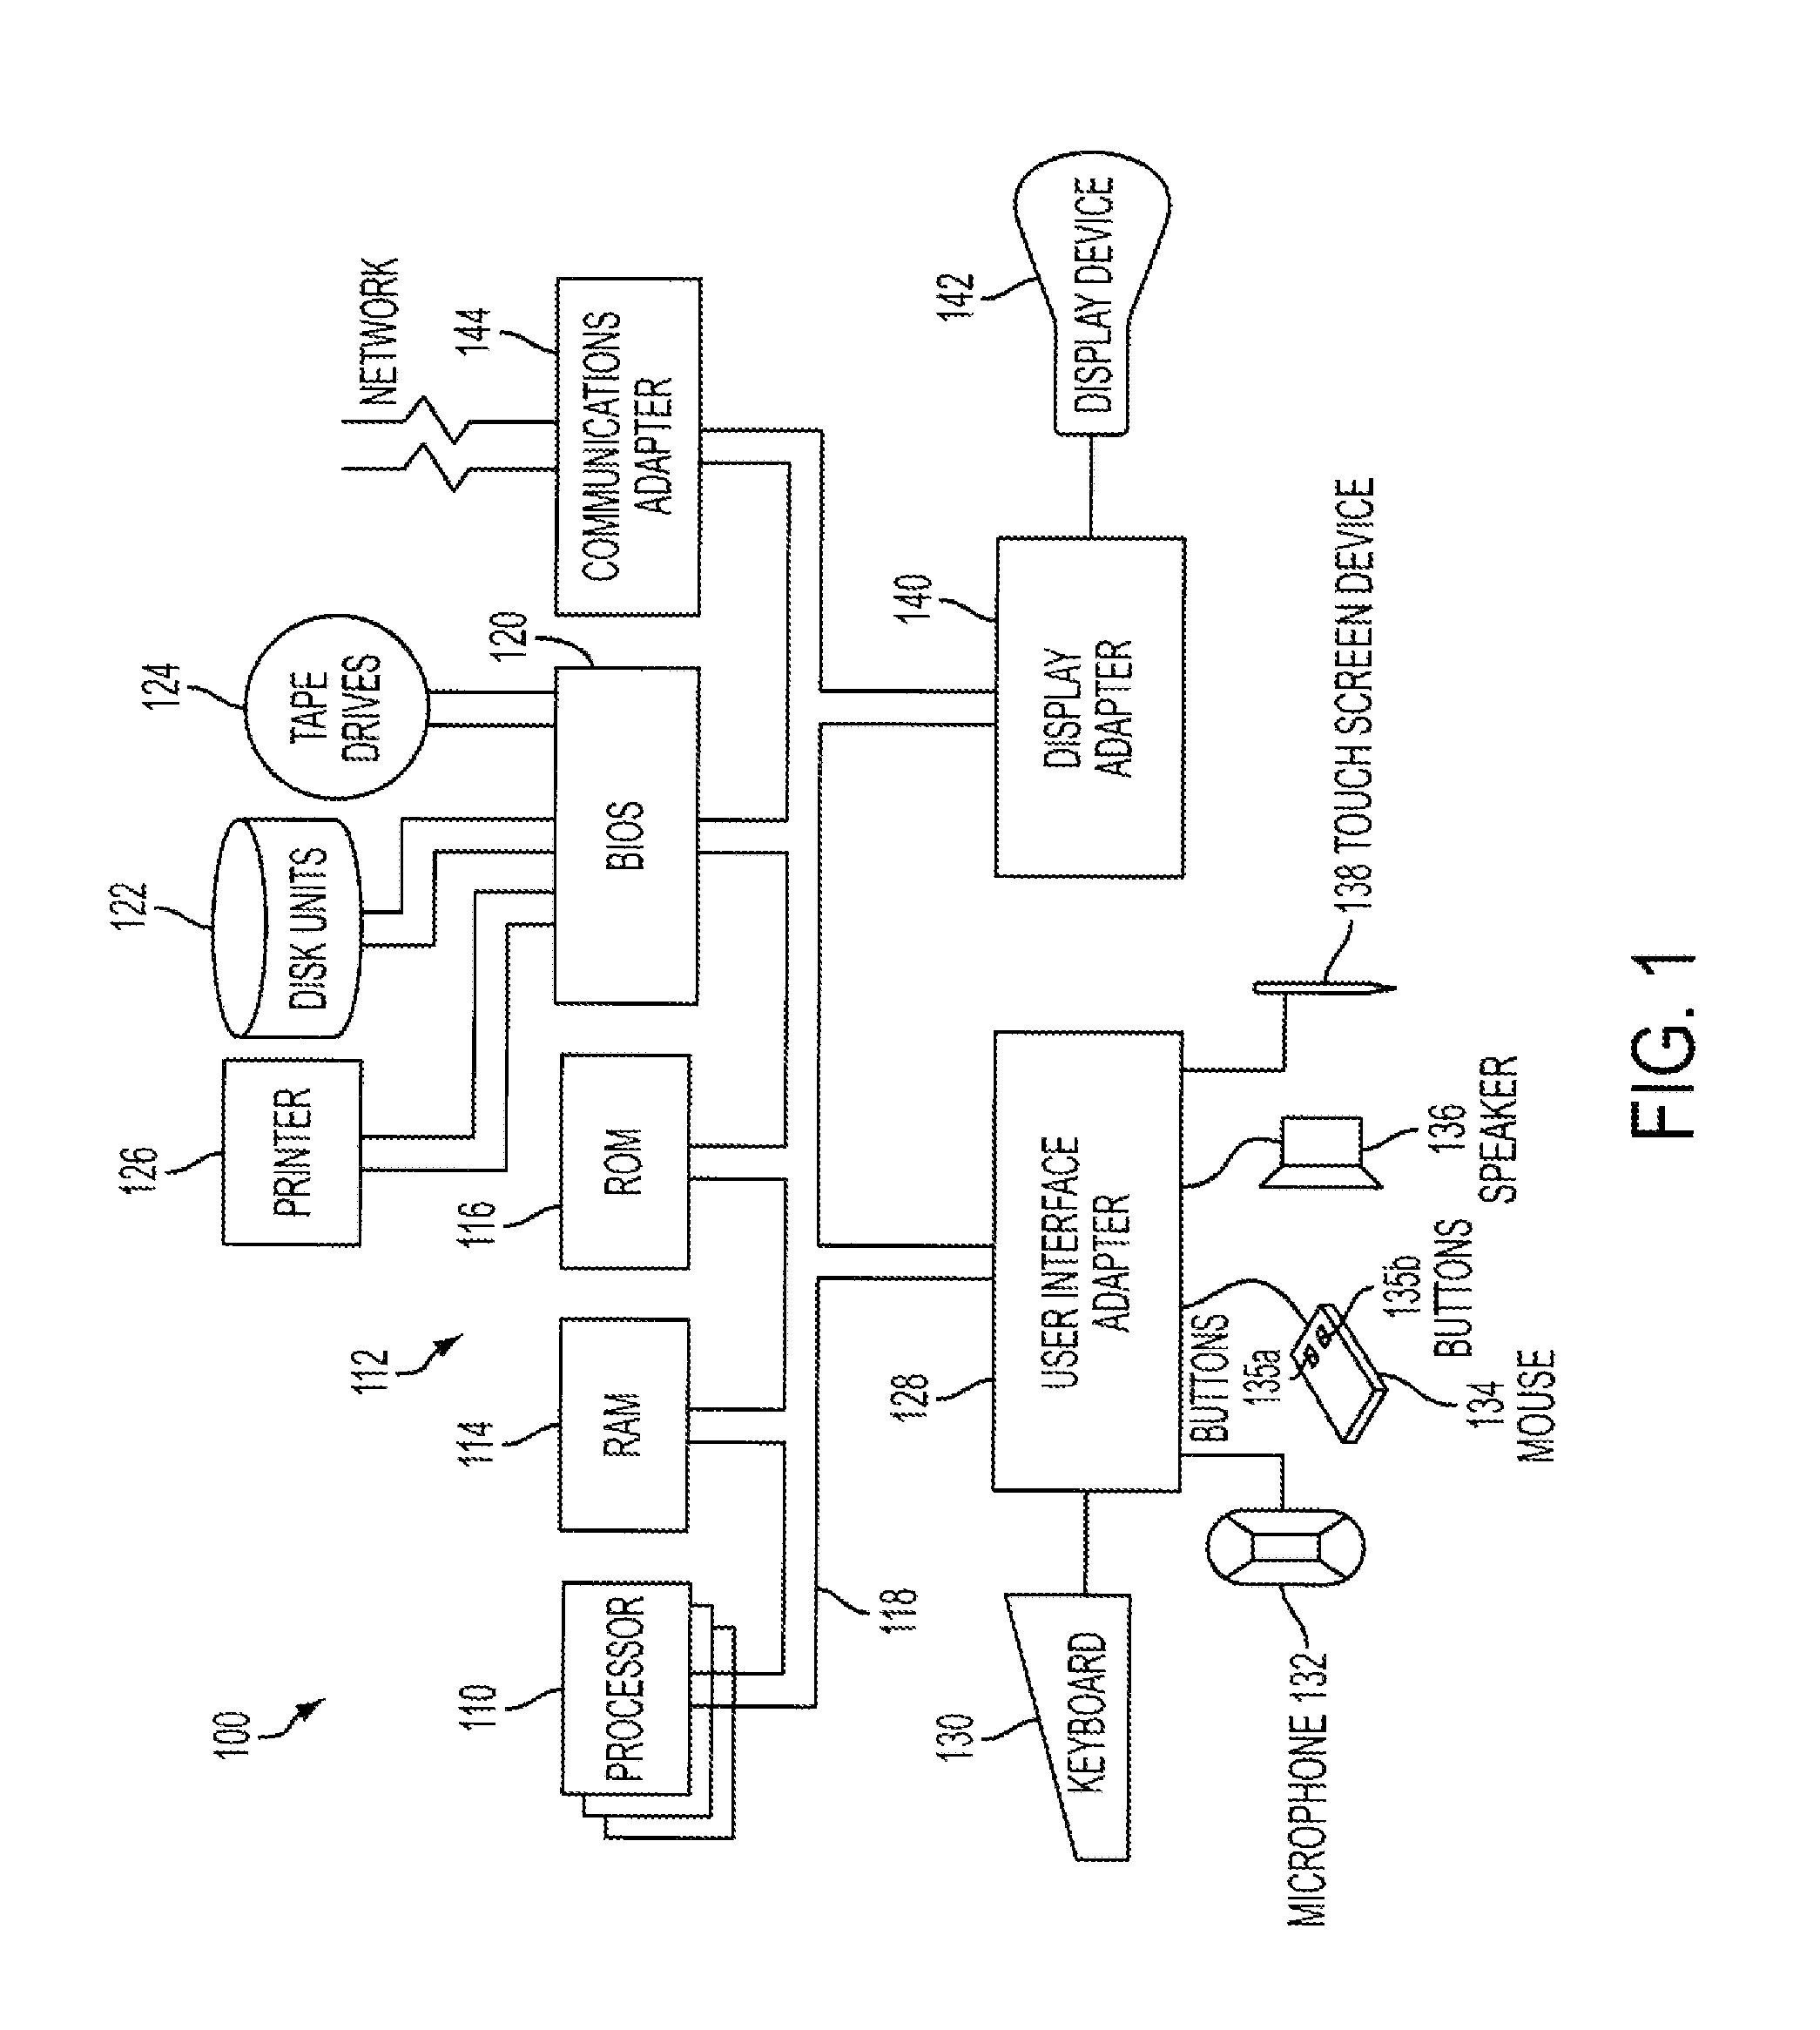 System and method for organizing, managing, and manipulating desktop objects with an activity-oriented user interface